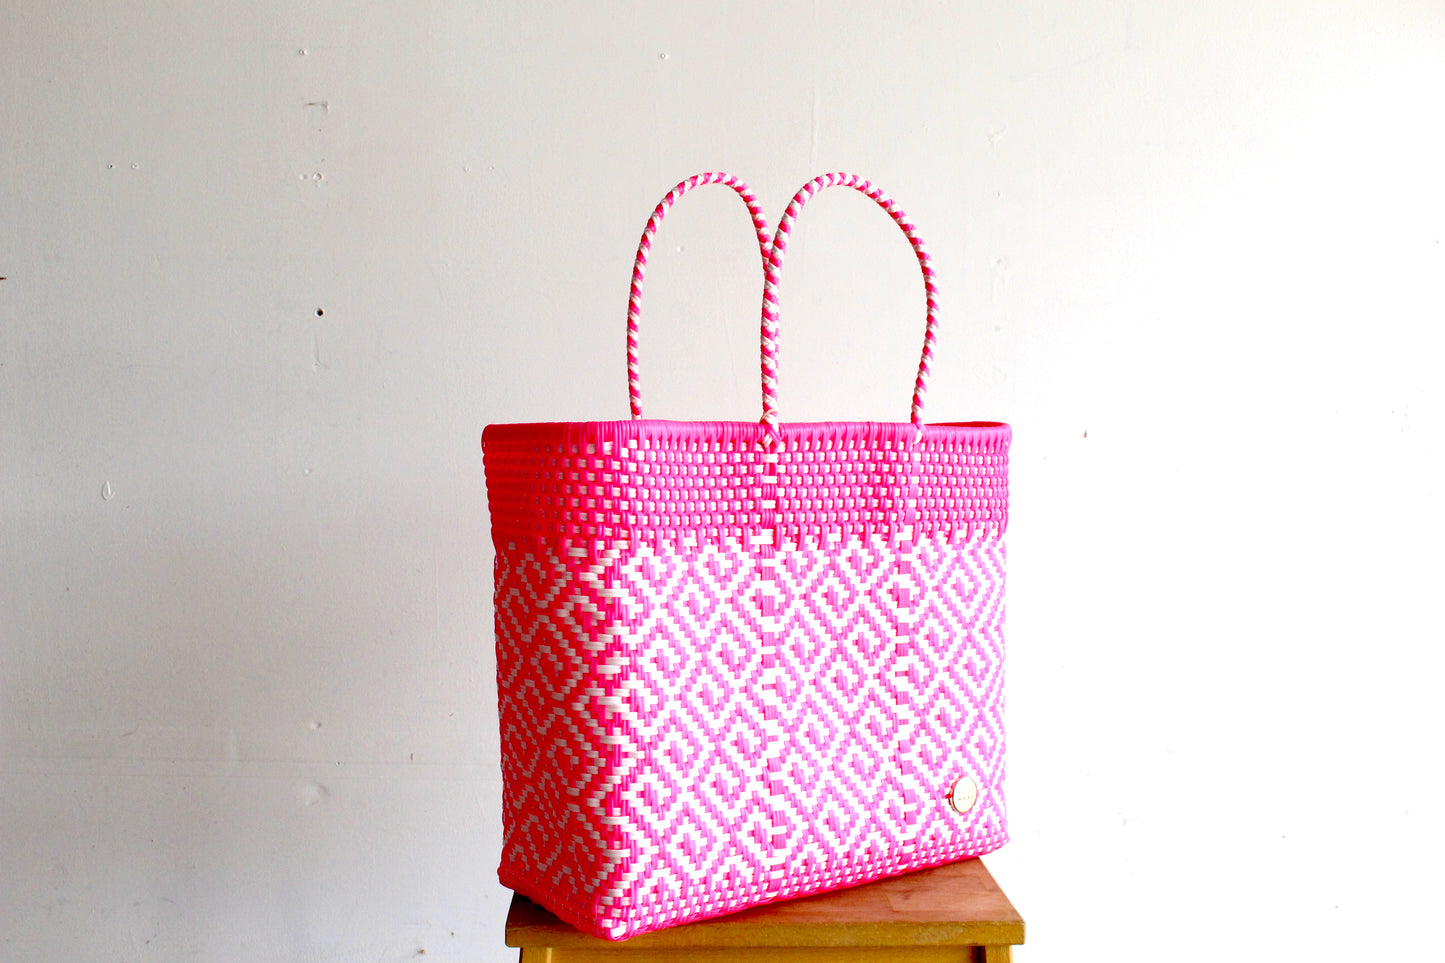 Hot Pink & White Tote bag by MexiMexi